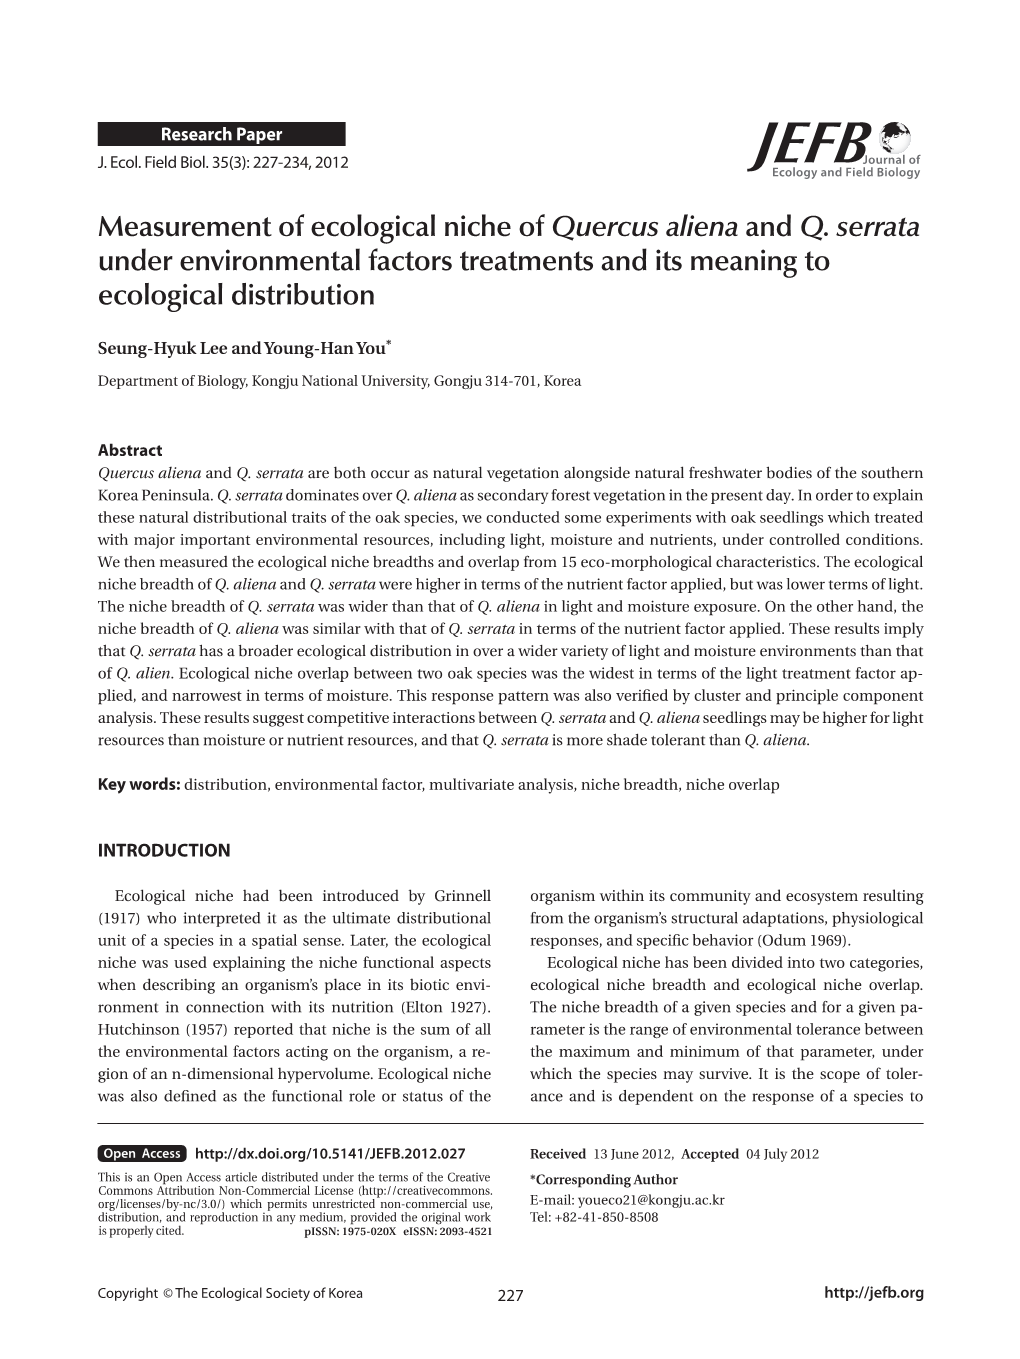 Measurement of Ecological Niche of Quercus Aliena and Q. Serrata Under Environmental Factors Treatments and Its Meaning to Ecological Distribution